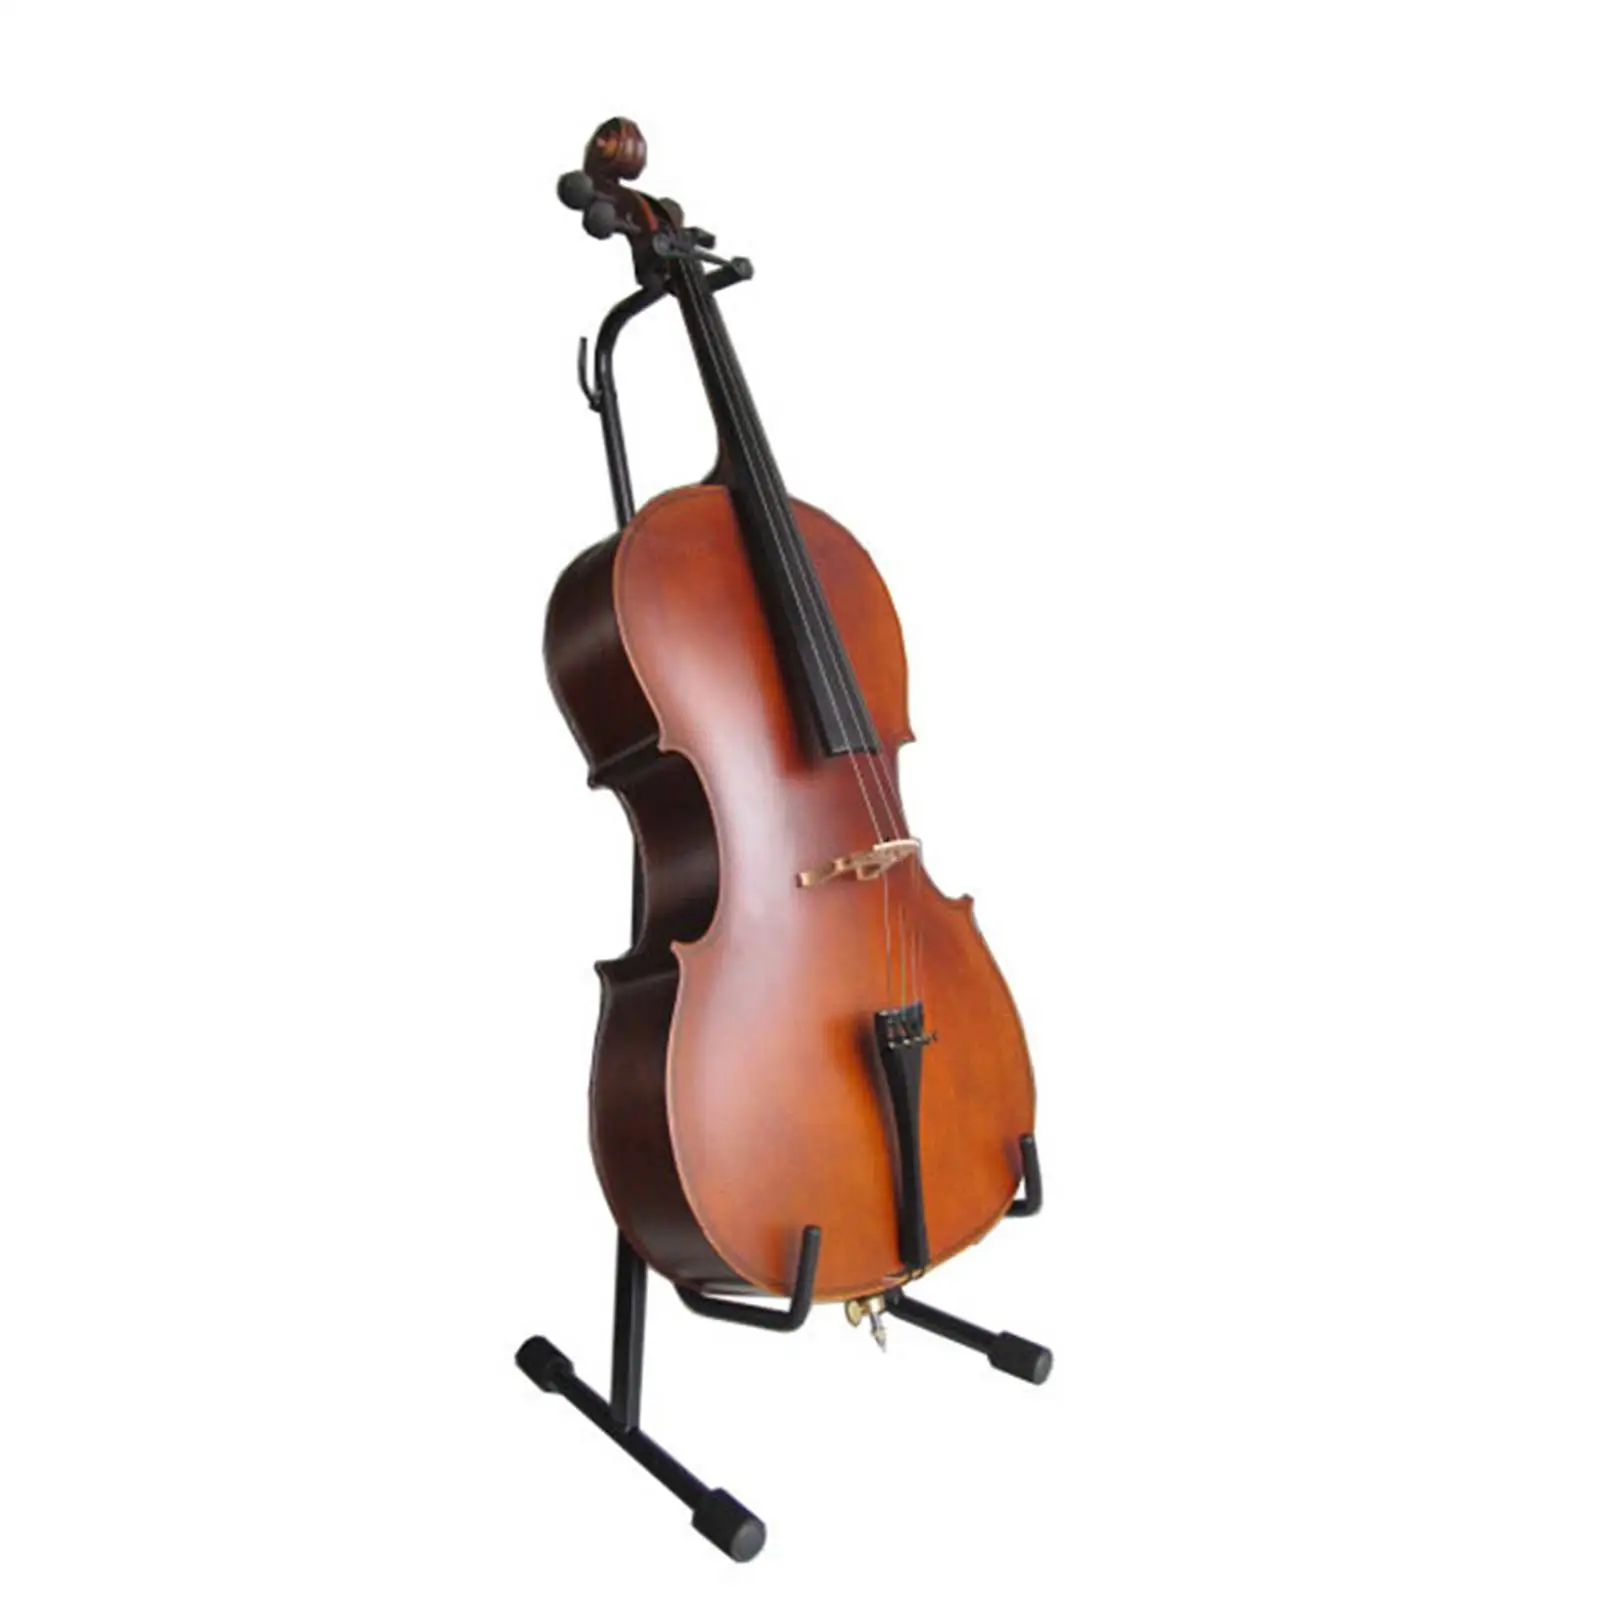 Adjustable Cello Stand with Hook Foldable Silicone Padding On The Support Arms Compact Design Accessory Guitar Instrument Stand